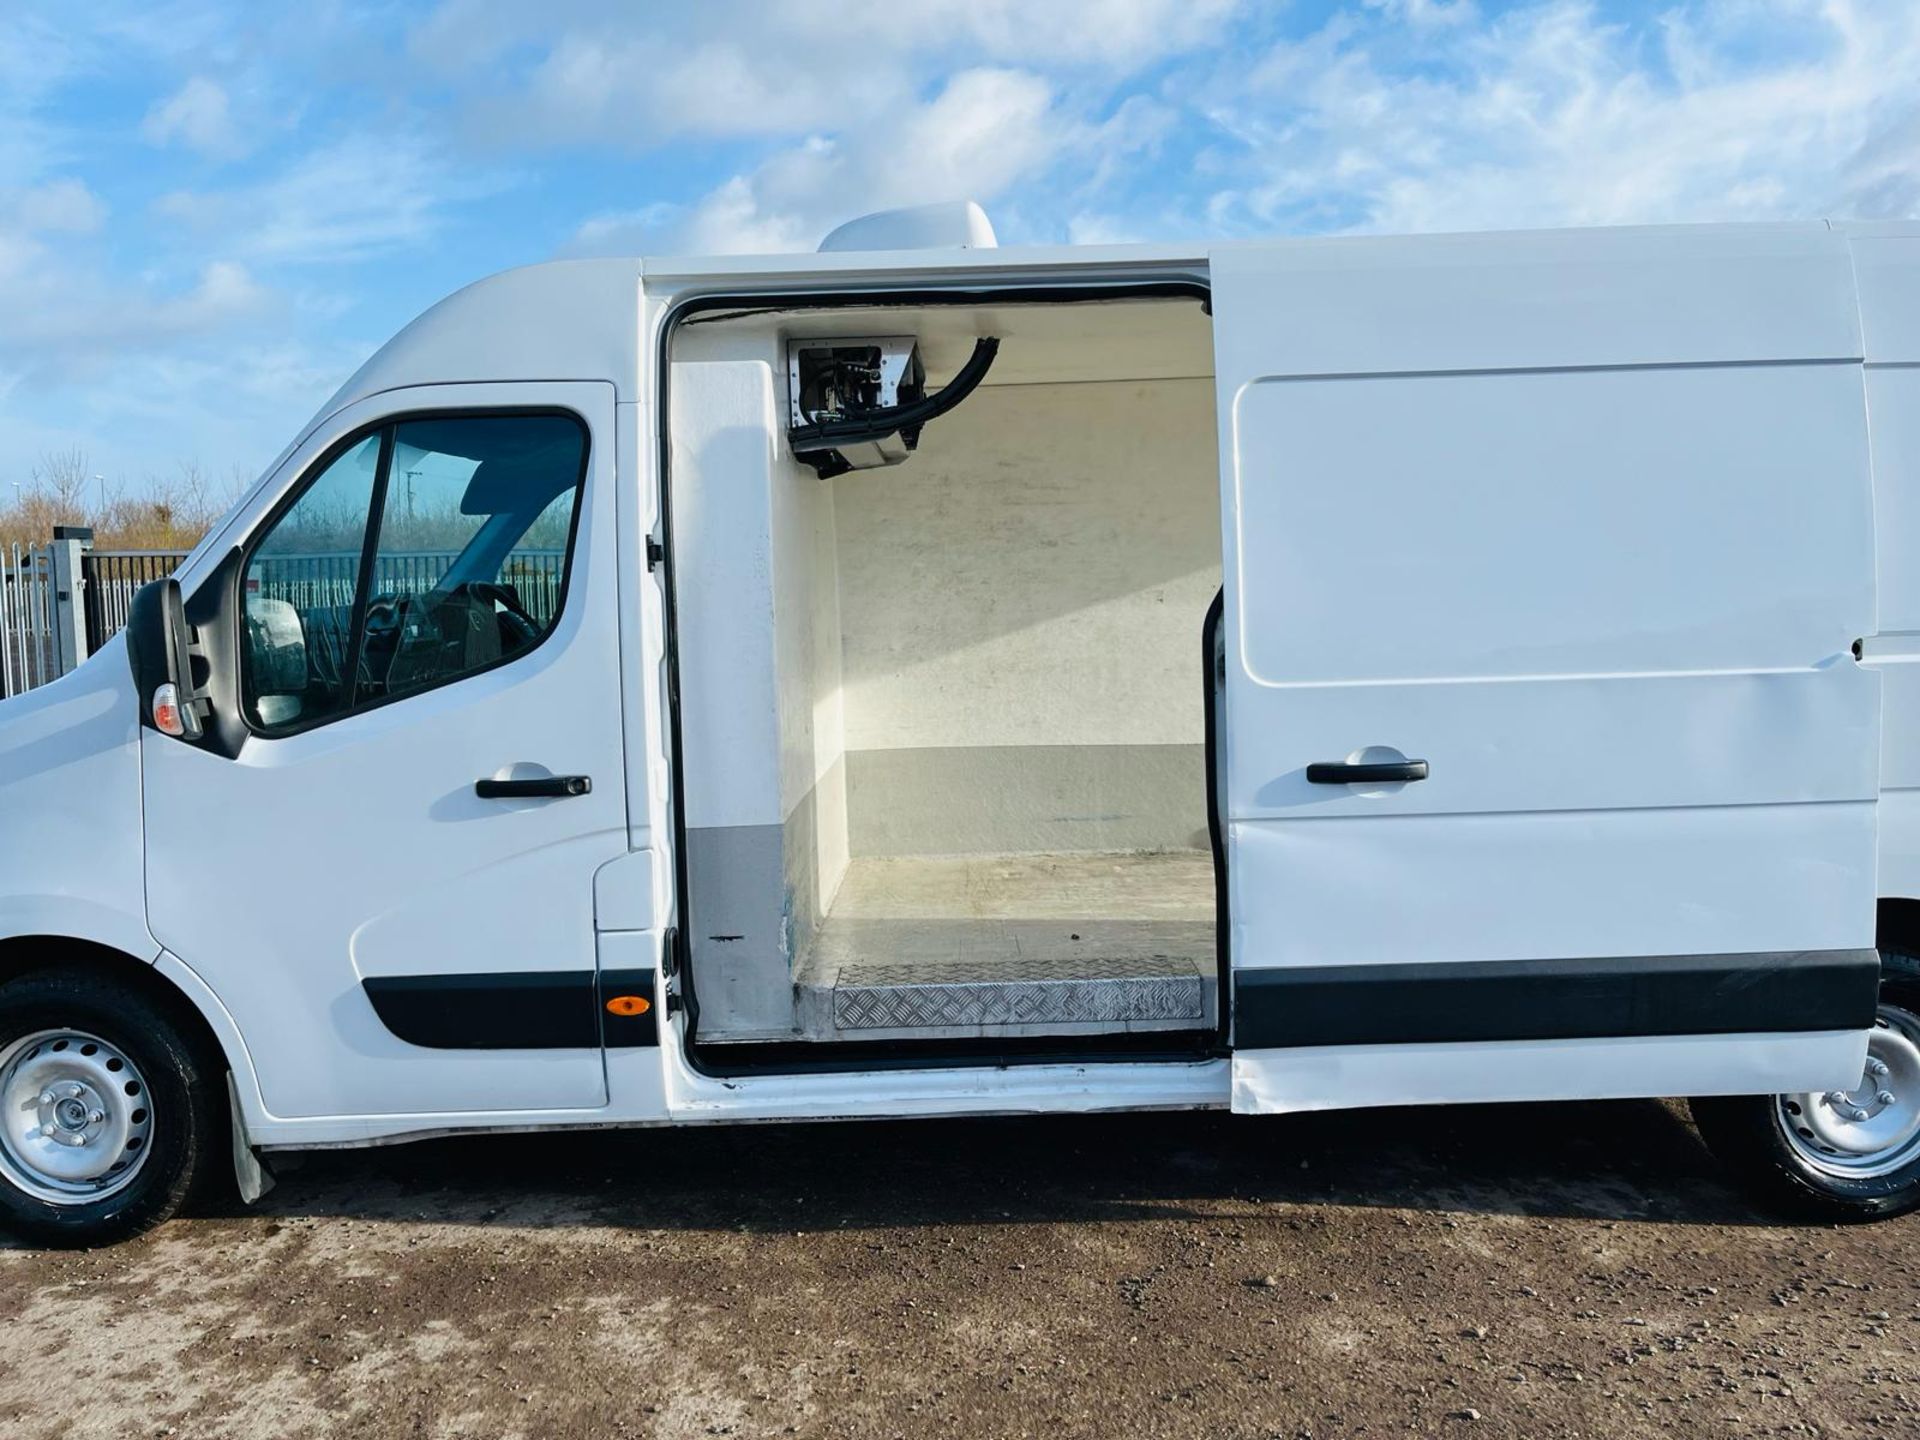 ** ON SALE ** Nissan NV400 Acenta Dci 135 F35- Refrigerated - Bluetooth Handsfree -ULEZ Compliant - Image 6 of 28